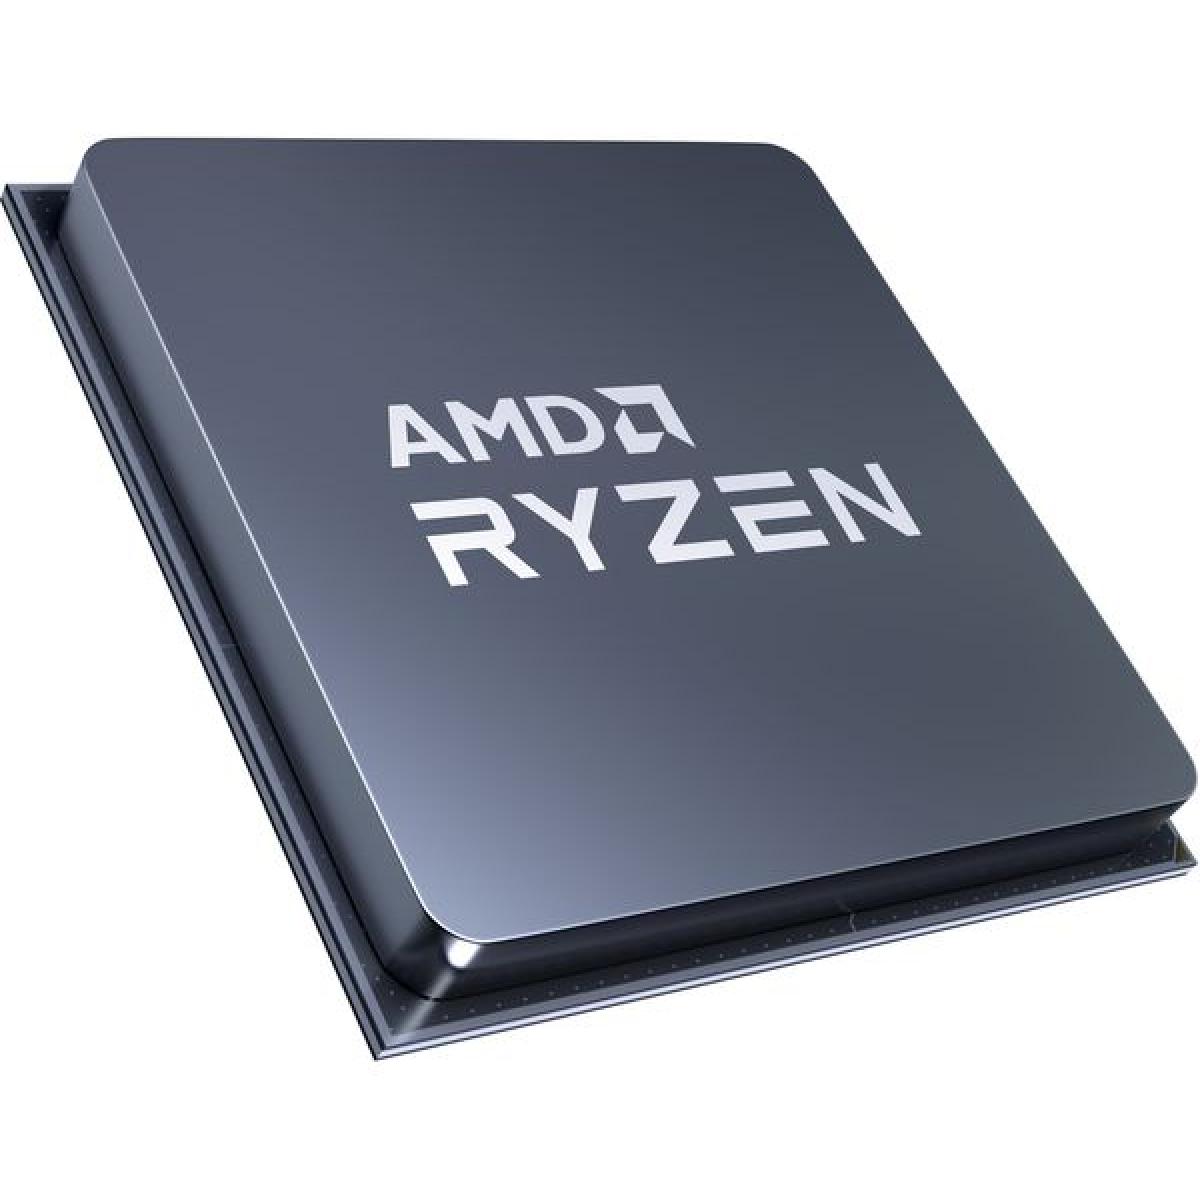 AMD RYZEN 5 5600 6-Core 3.5 GHz (4.4 GHz Max Boost) Tray ( Wihout Cooler )